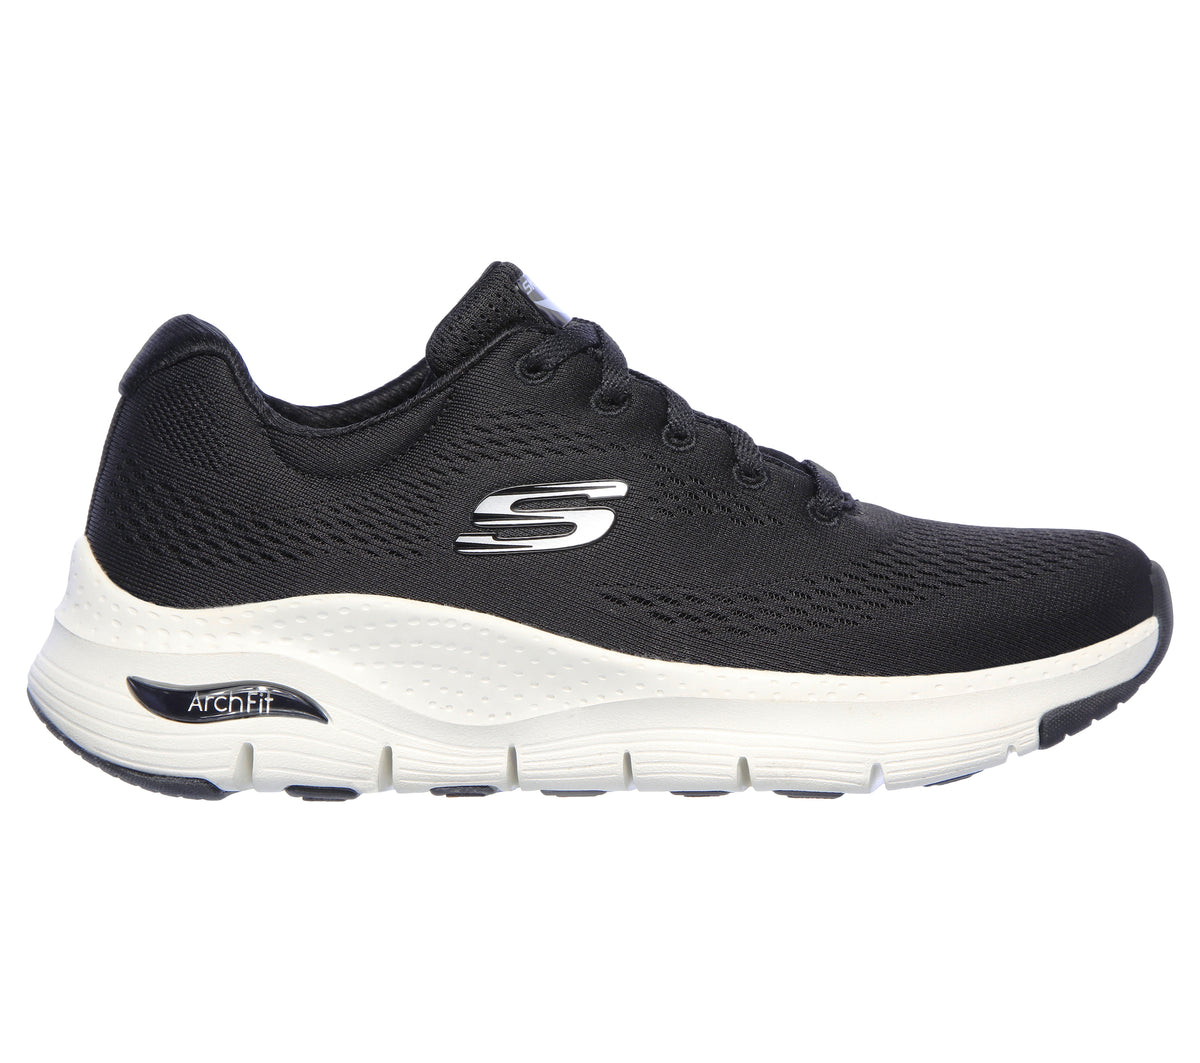 Skechers Arch Fit Black/White – Mason Brothers Footwear & Apparel